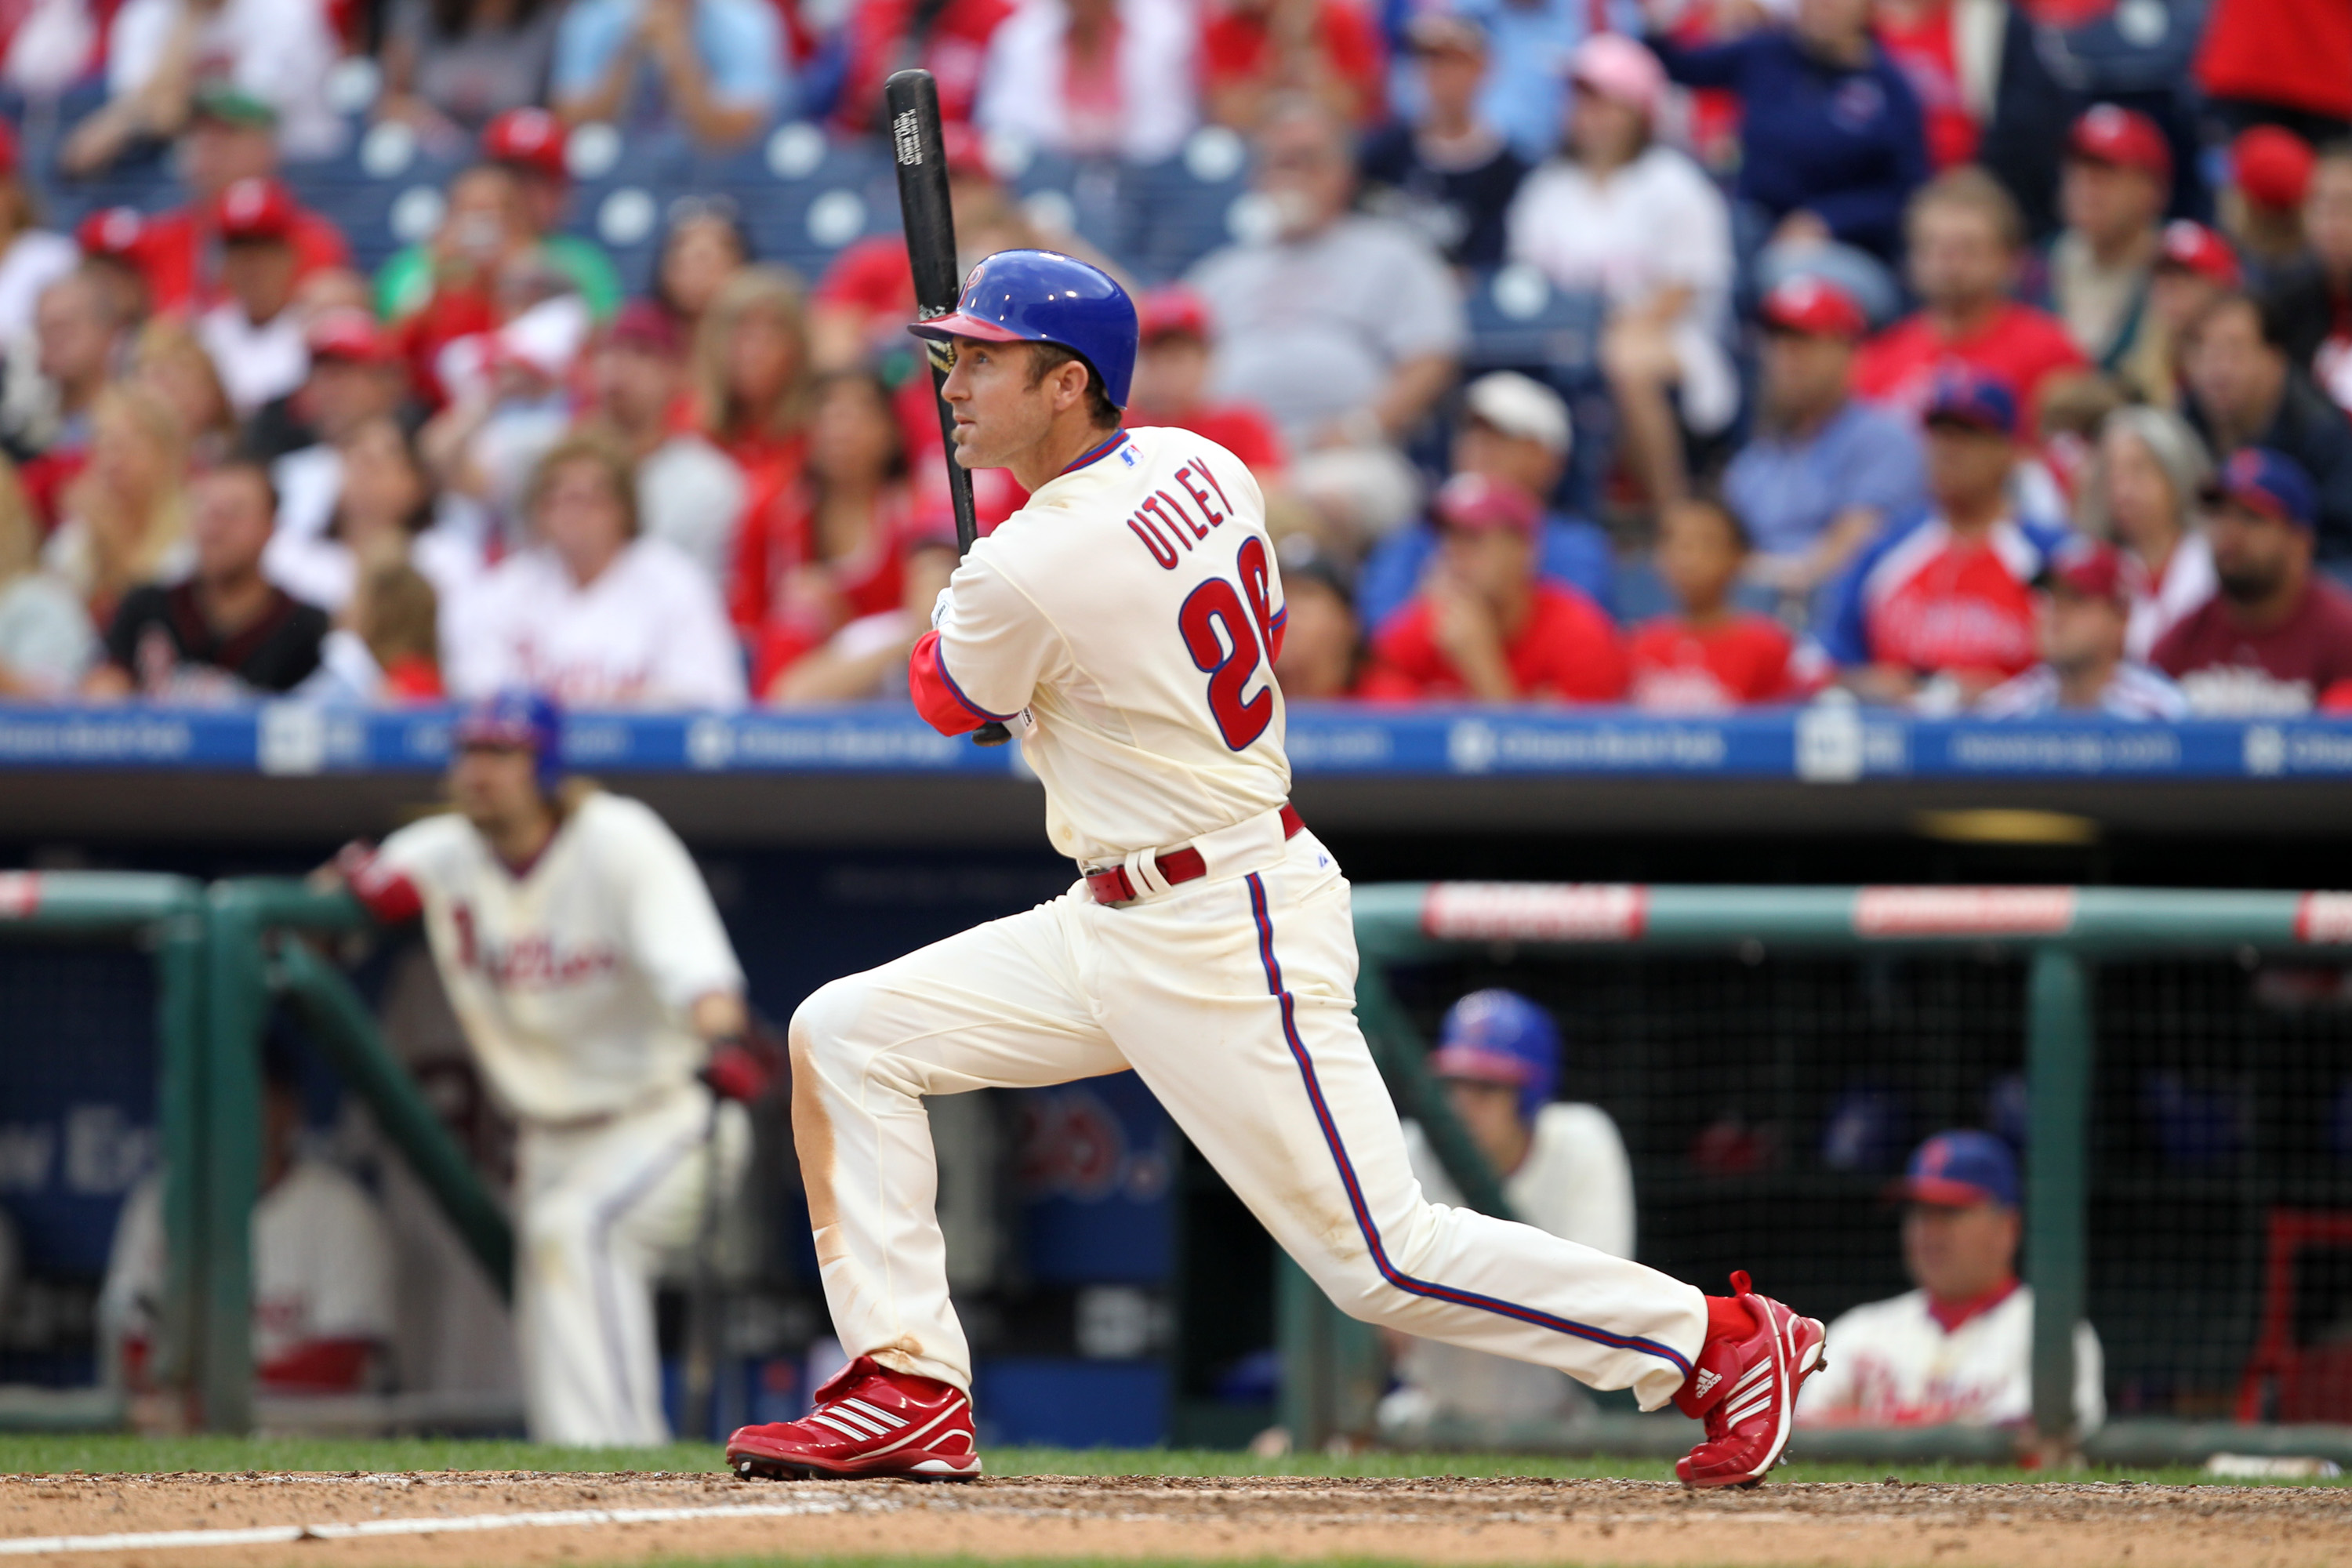 PHILLIES' CHASE UTLEY A RARITY: LAST OF THE ONE-TEAM WONDERS